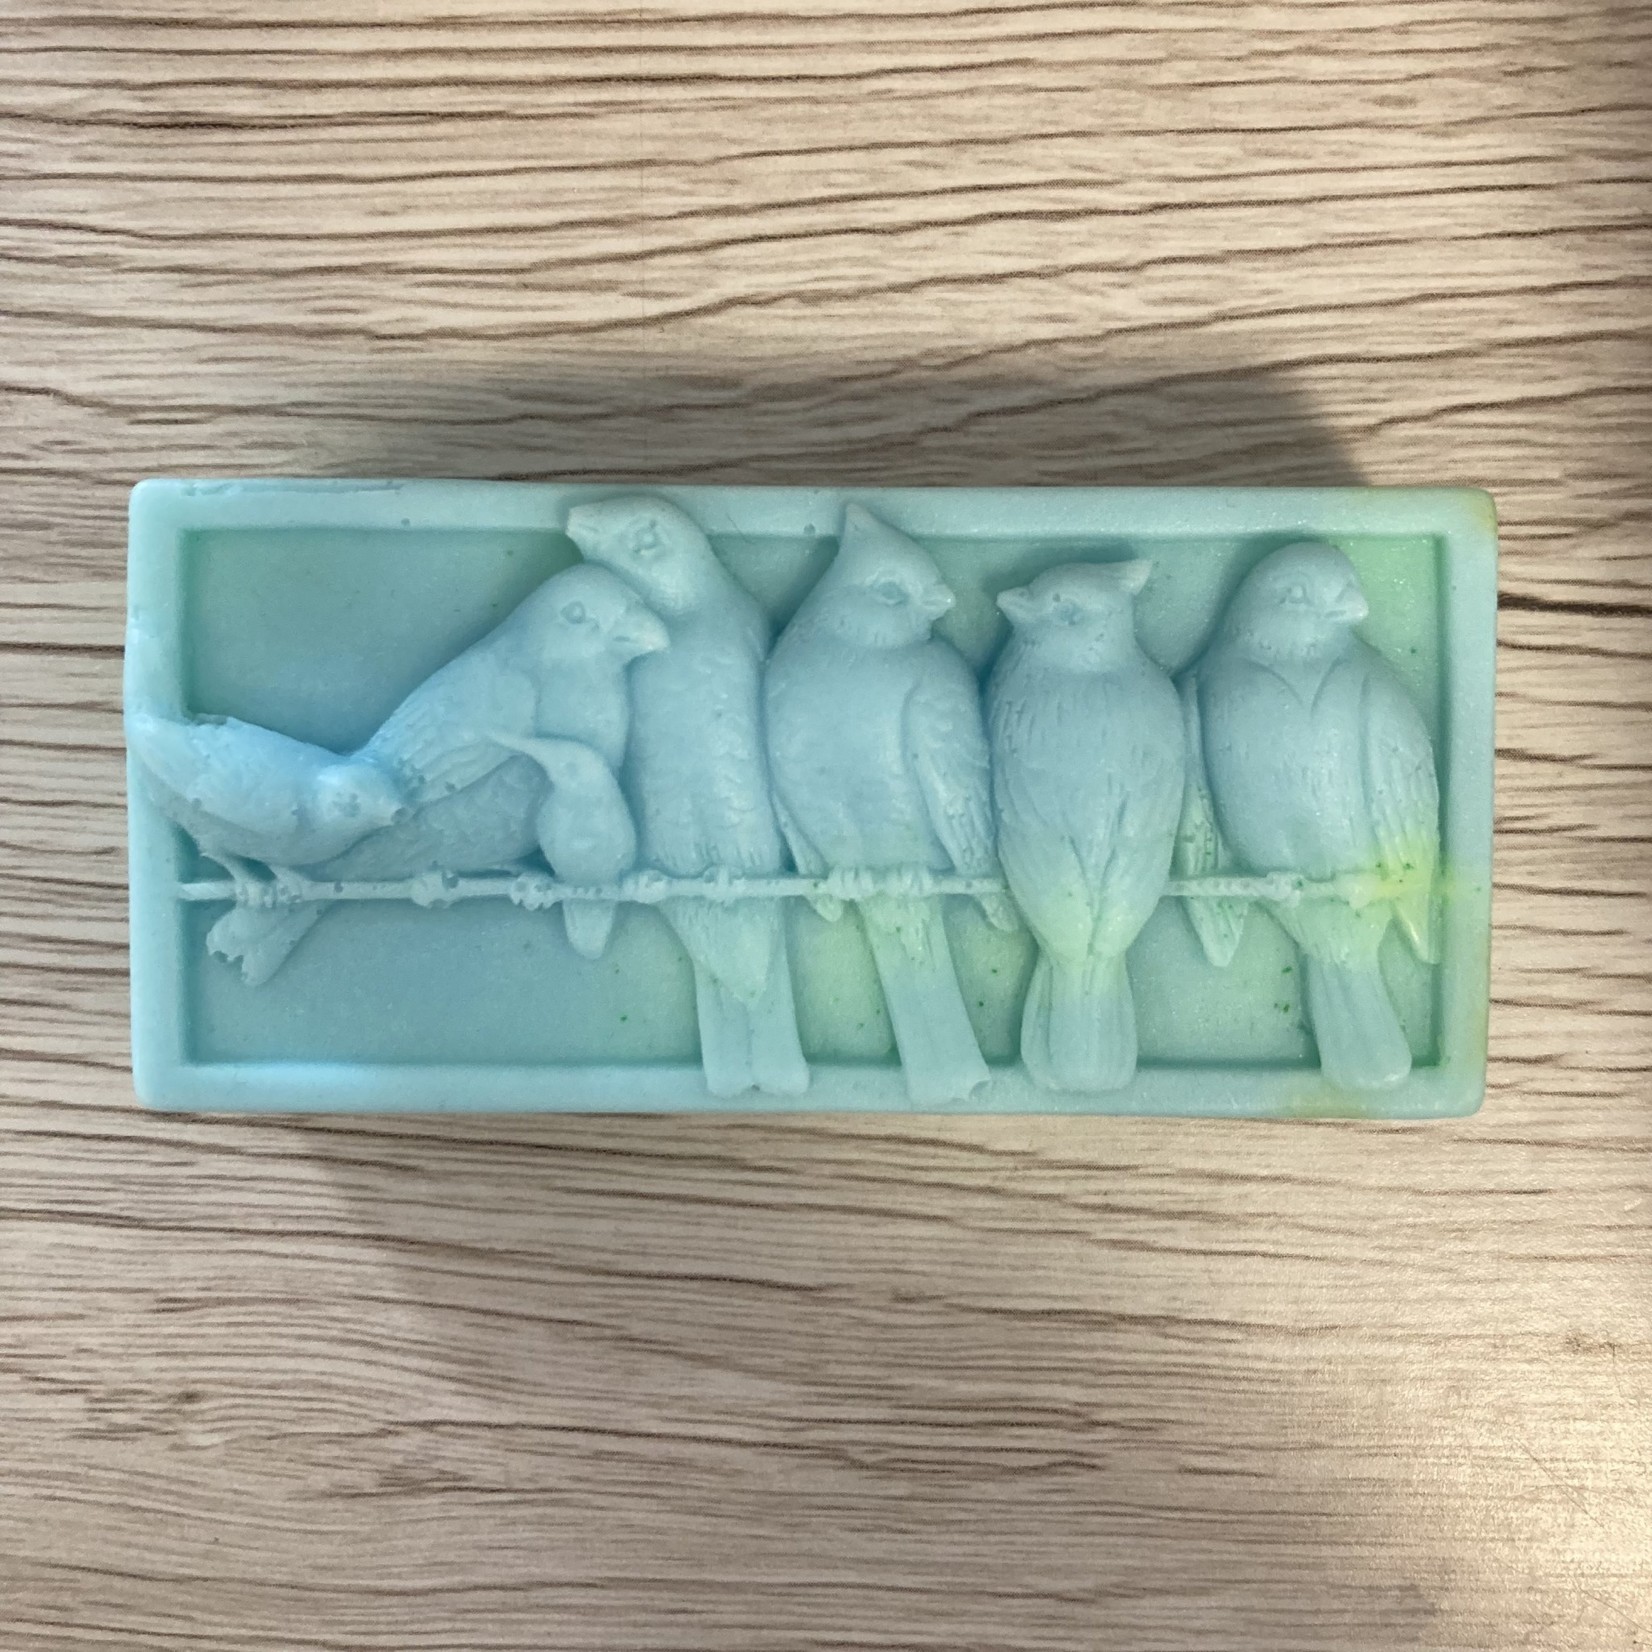 Heaven Scent Birds on a Wire Soap